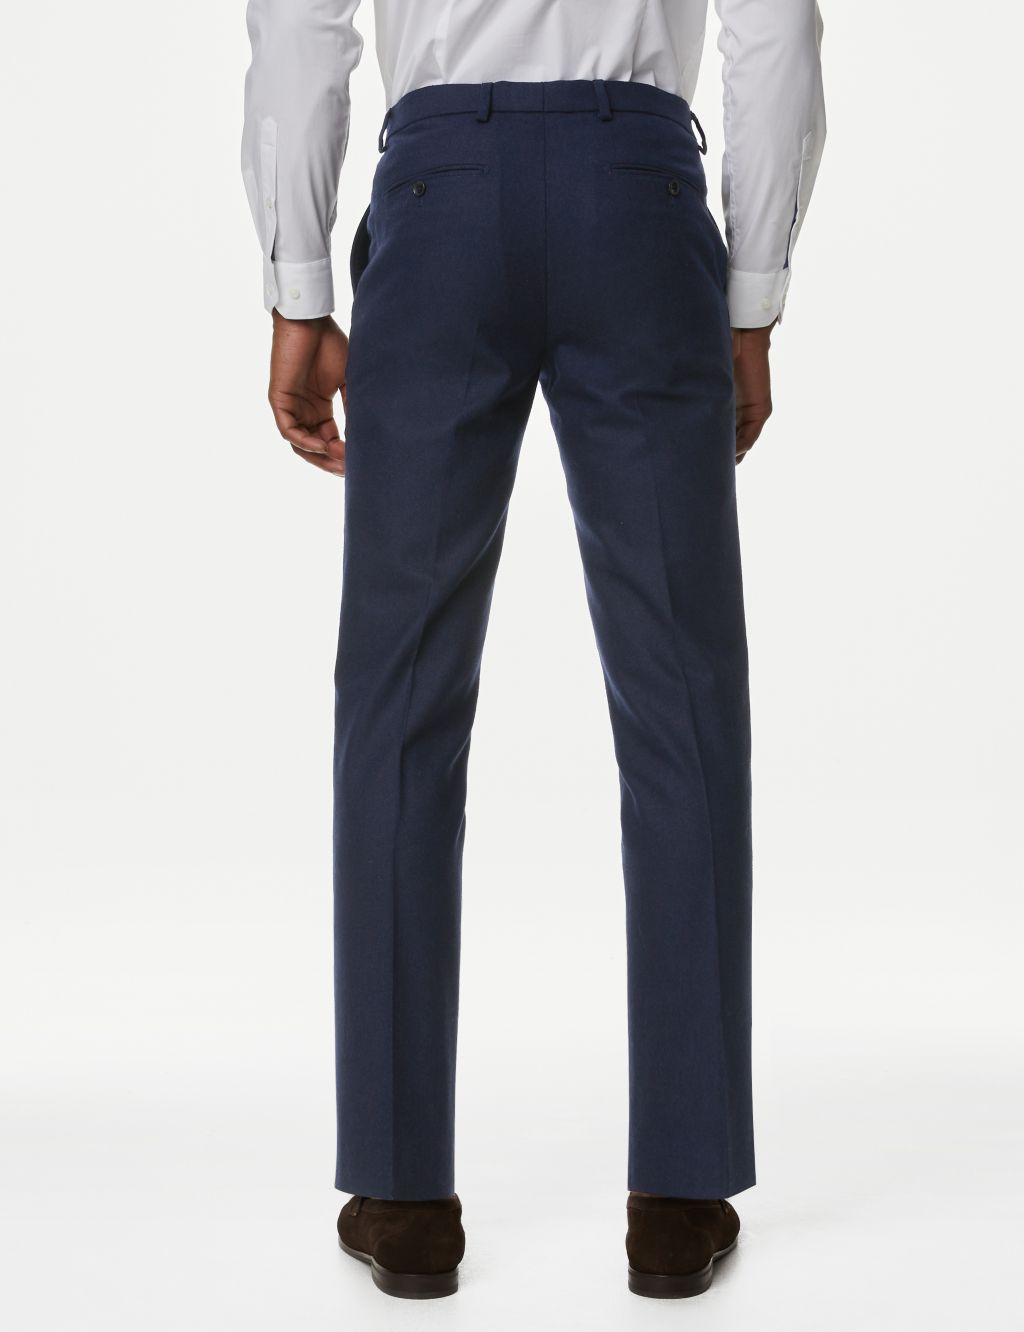 Tailored Fit Wool Rich Donegal Suit Trousers image 5